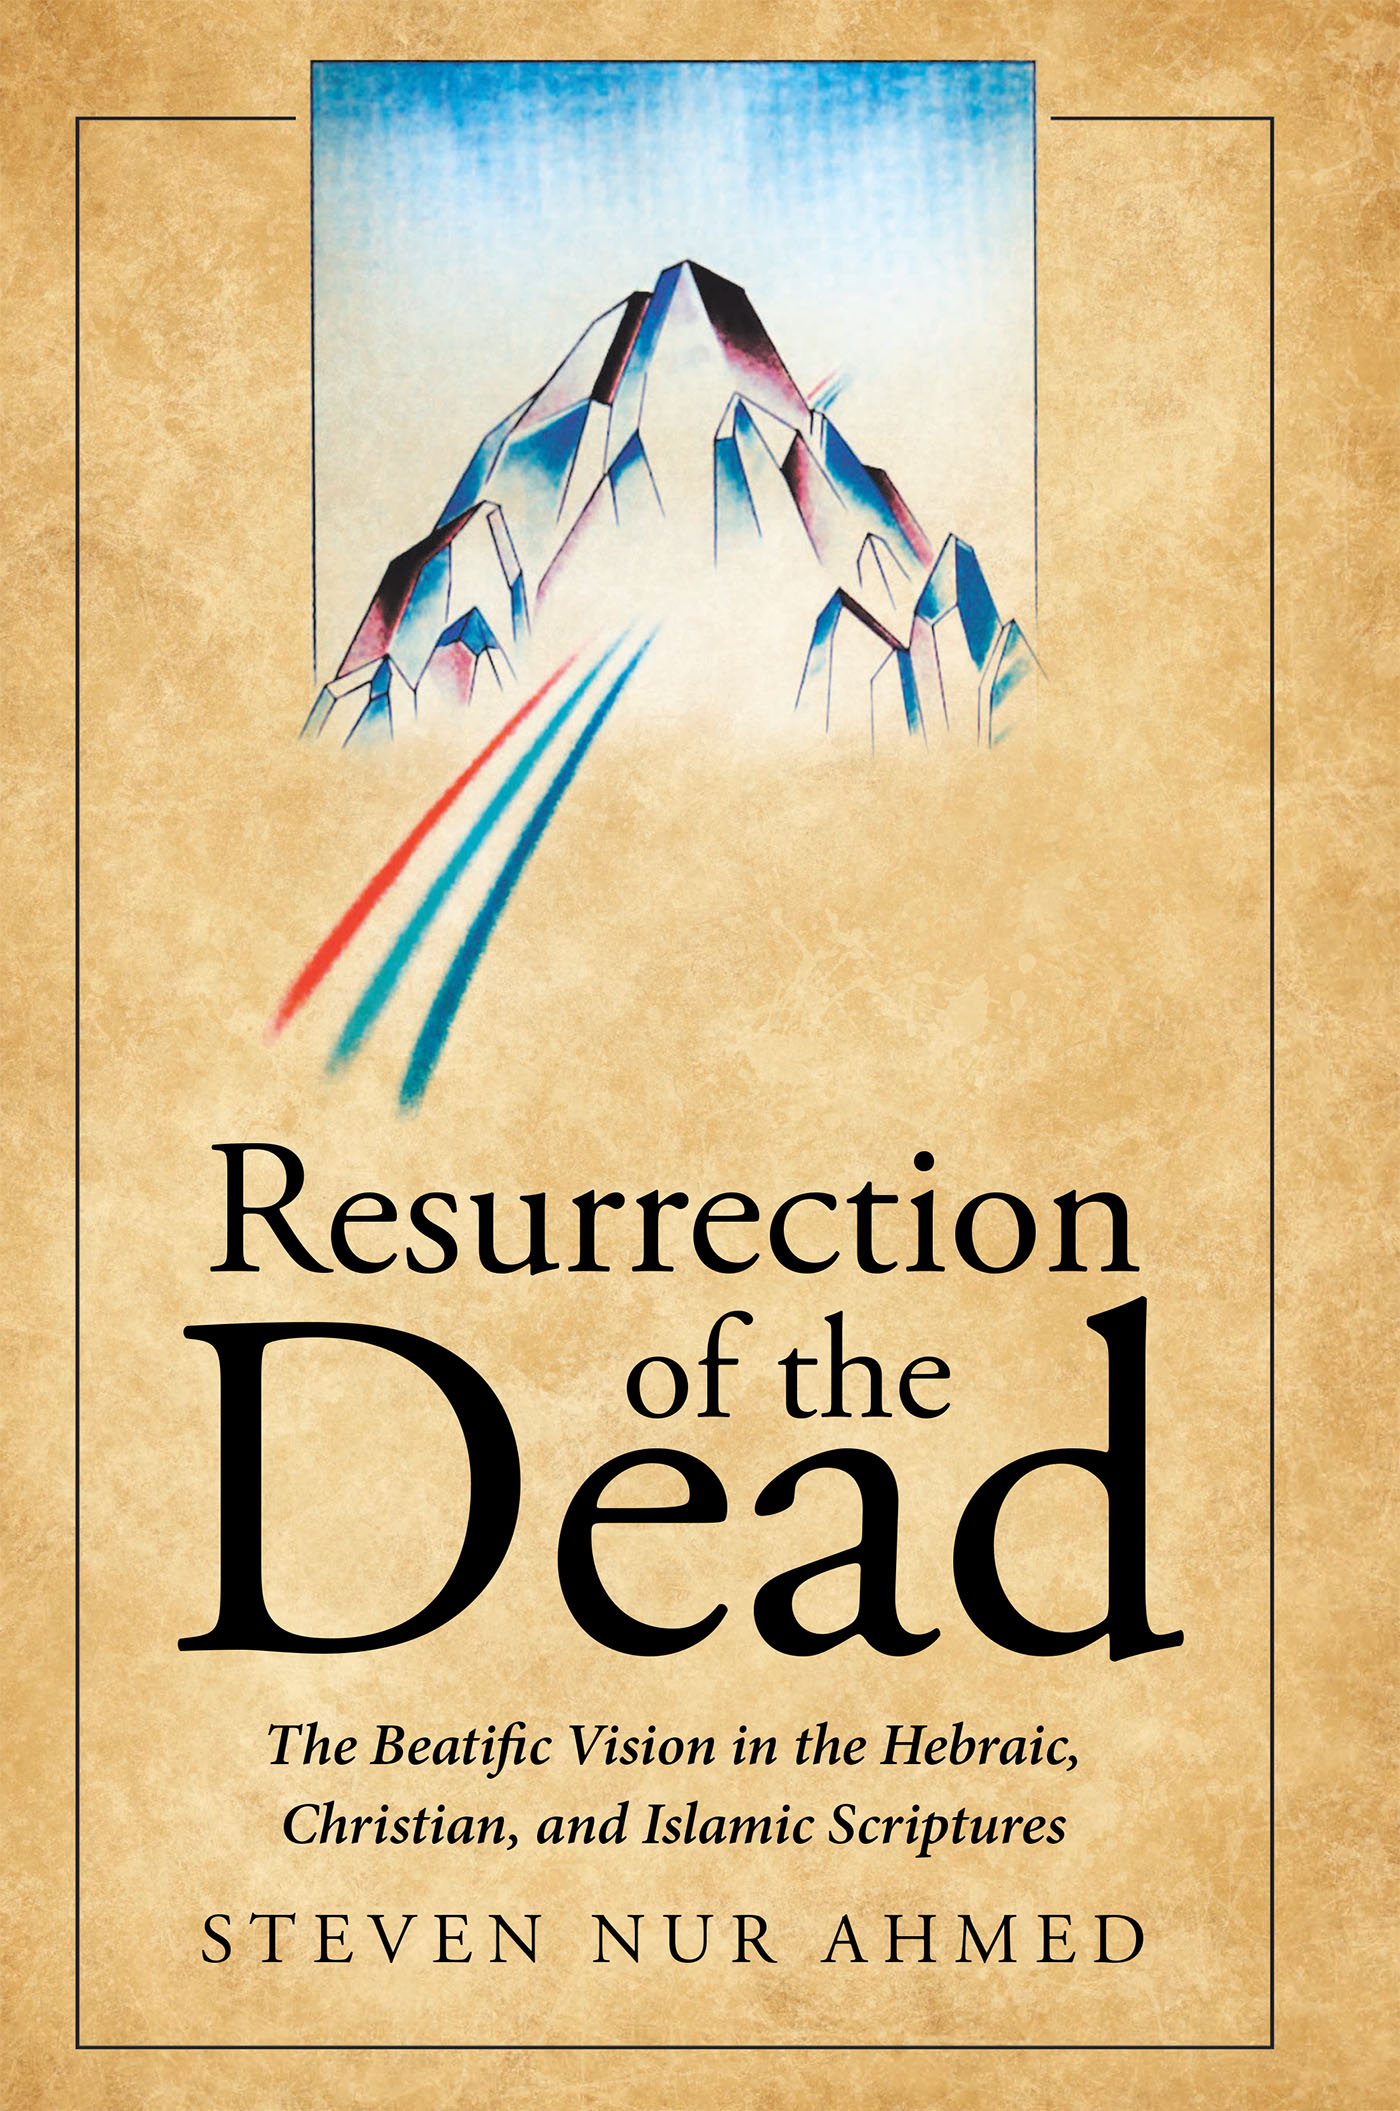 Author Steven Nur Ahmed’s New Book, "Resurrection of the Dead," Explores Formerly Hidden Divine Truths of the Universe Through Hebraic, Christian, and Islamic Texts